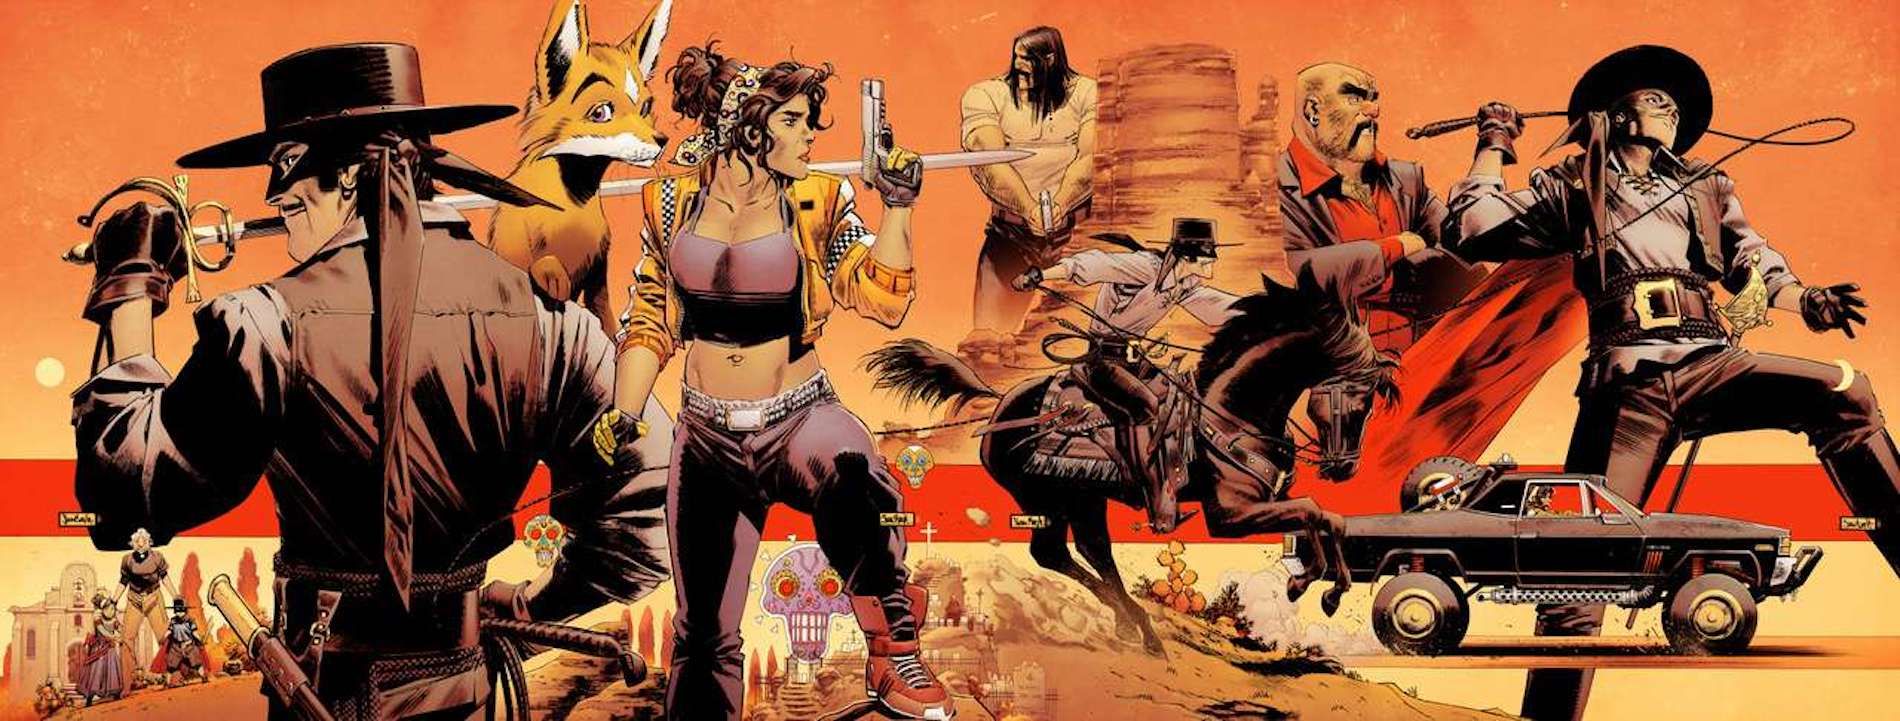 Exclusive: Zorro To Get a Modern Reboot in New Series From Batman: White Knight’s Sean Murphy